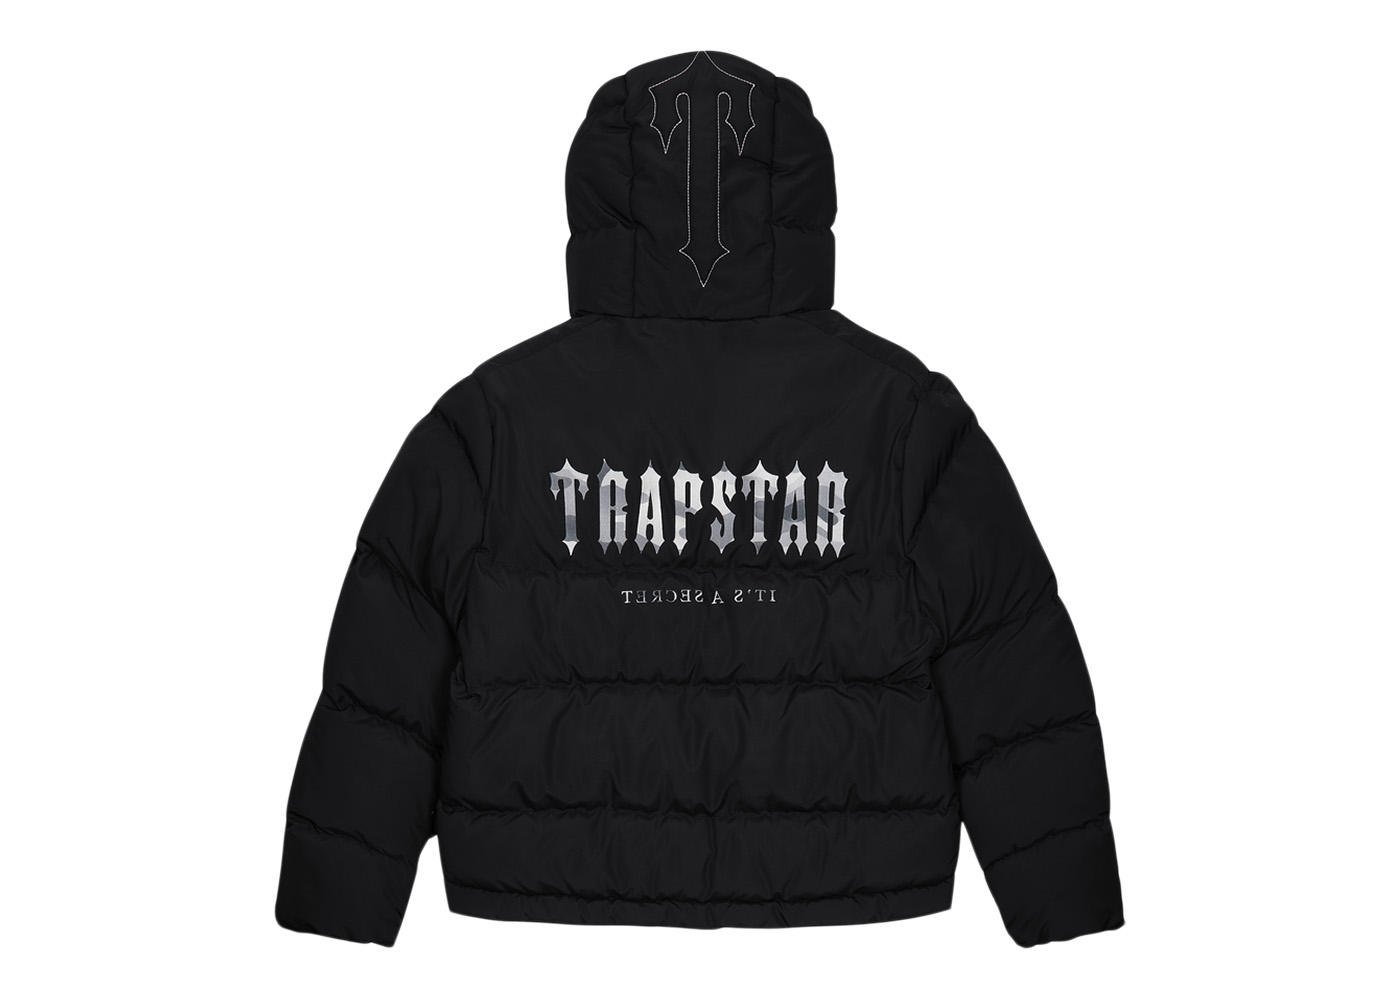 Trapstar Decoded 2023 Hooded Puffer Grey Warm Jackets For Men High Quality  Winter Fashion For Men And Women From Ying1788, $87.12 | DHgate.Com